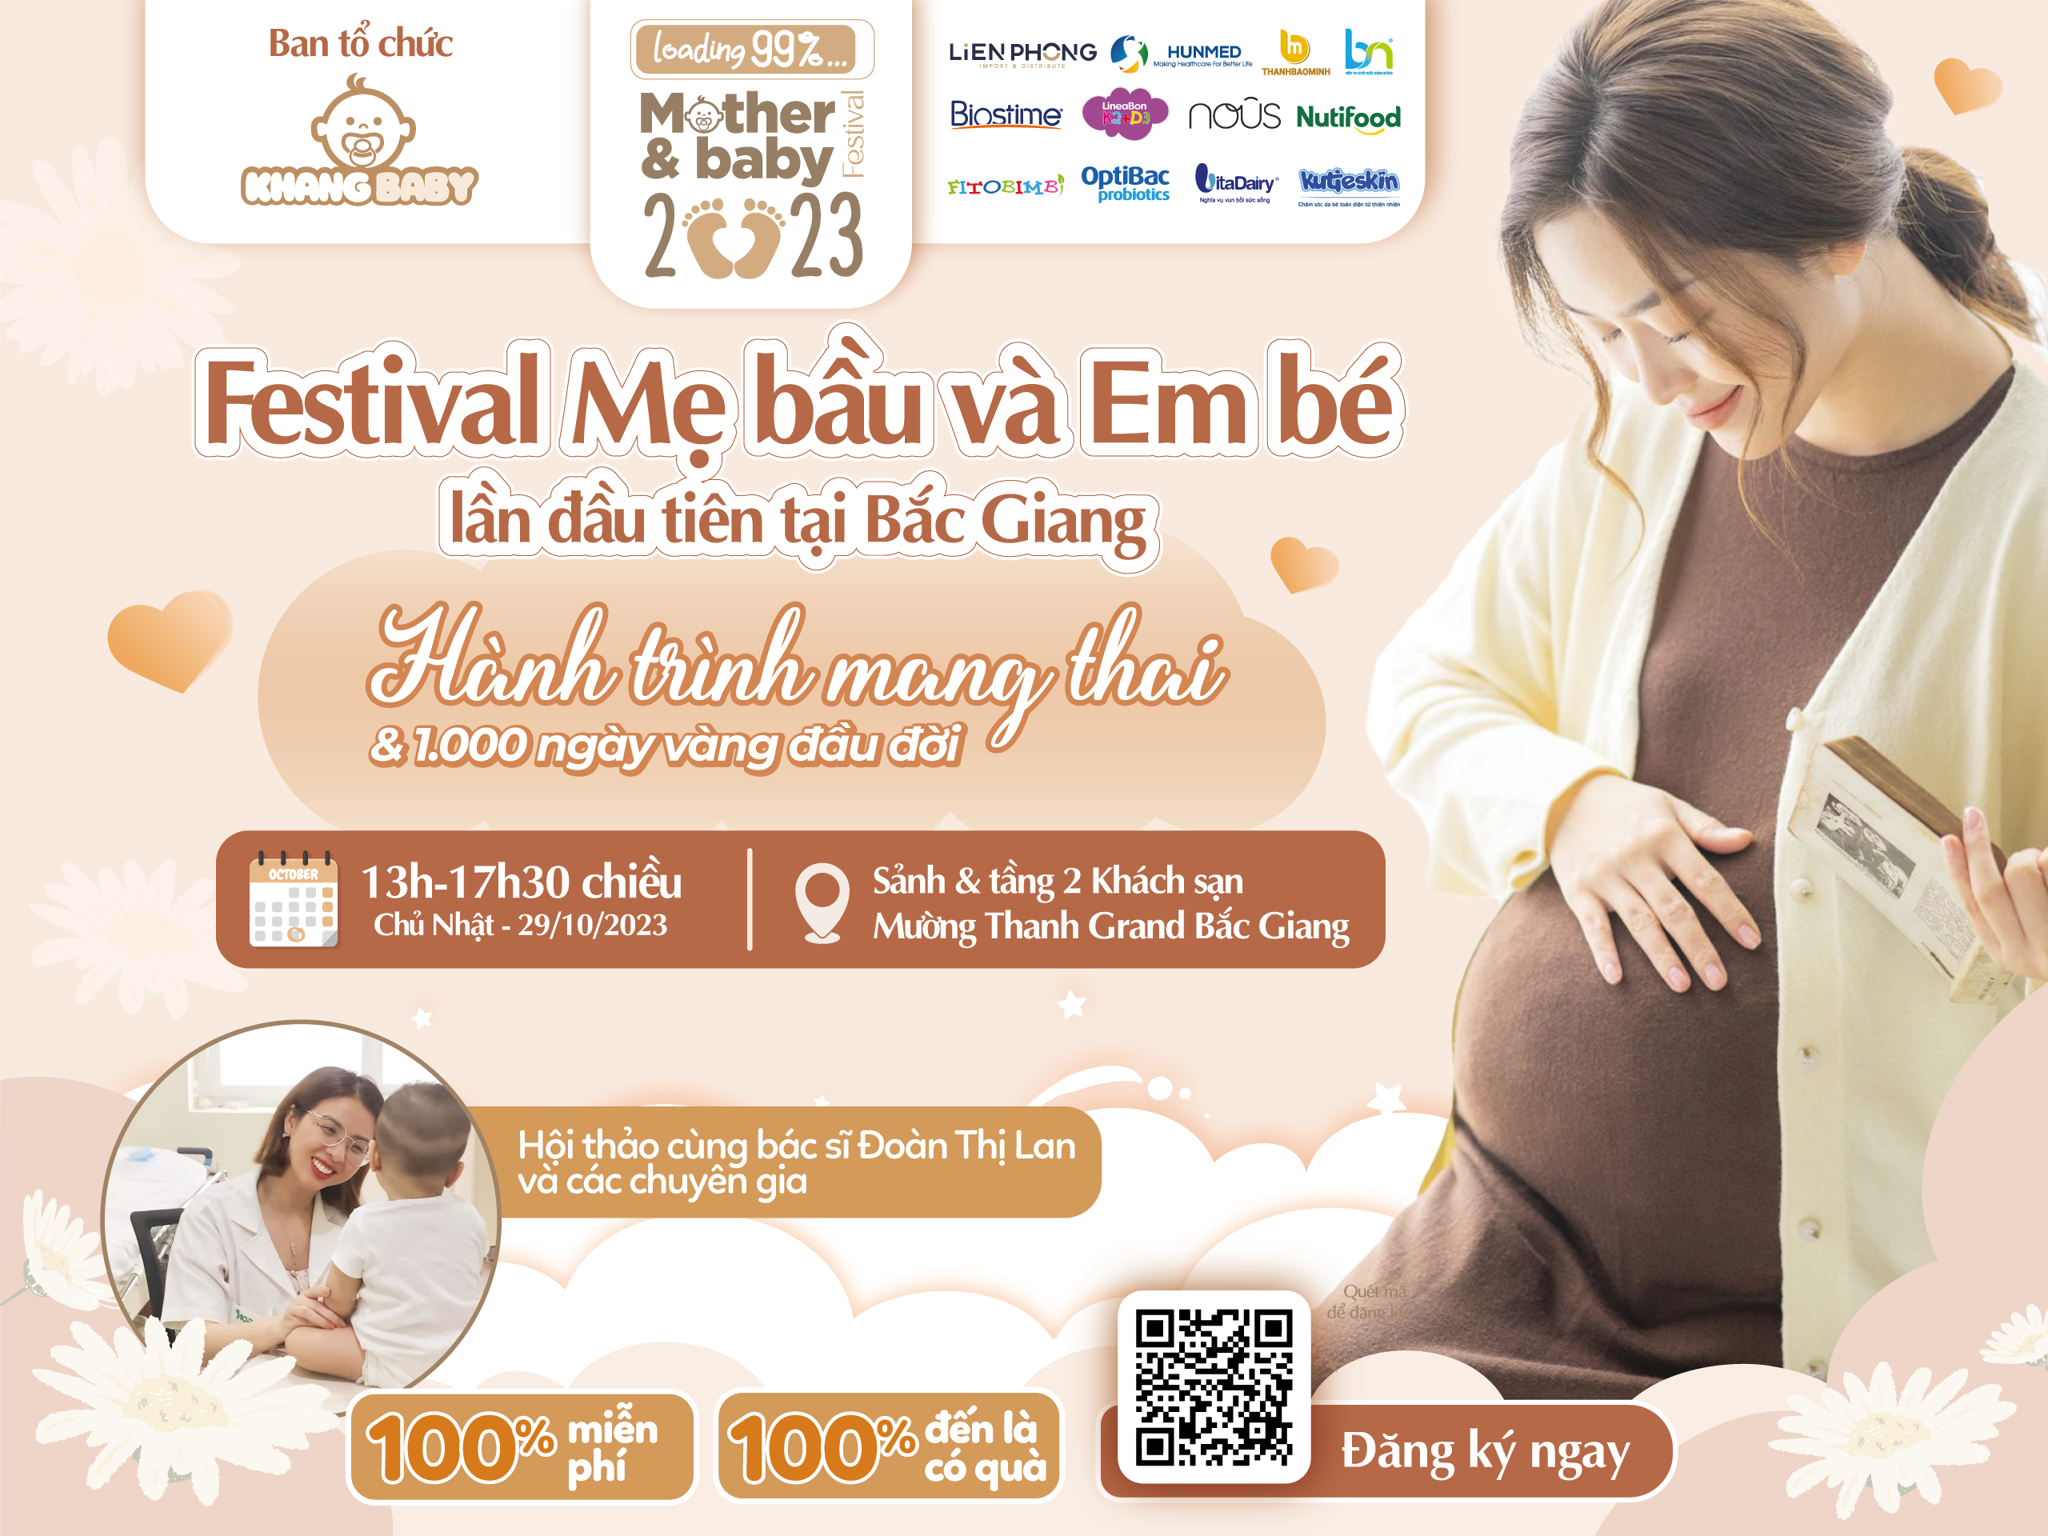 Pregnant Mother and Baby Festival 2023 - Pregnancy journey and the first 1000 golden days of your baby's life5